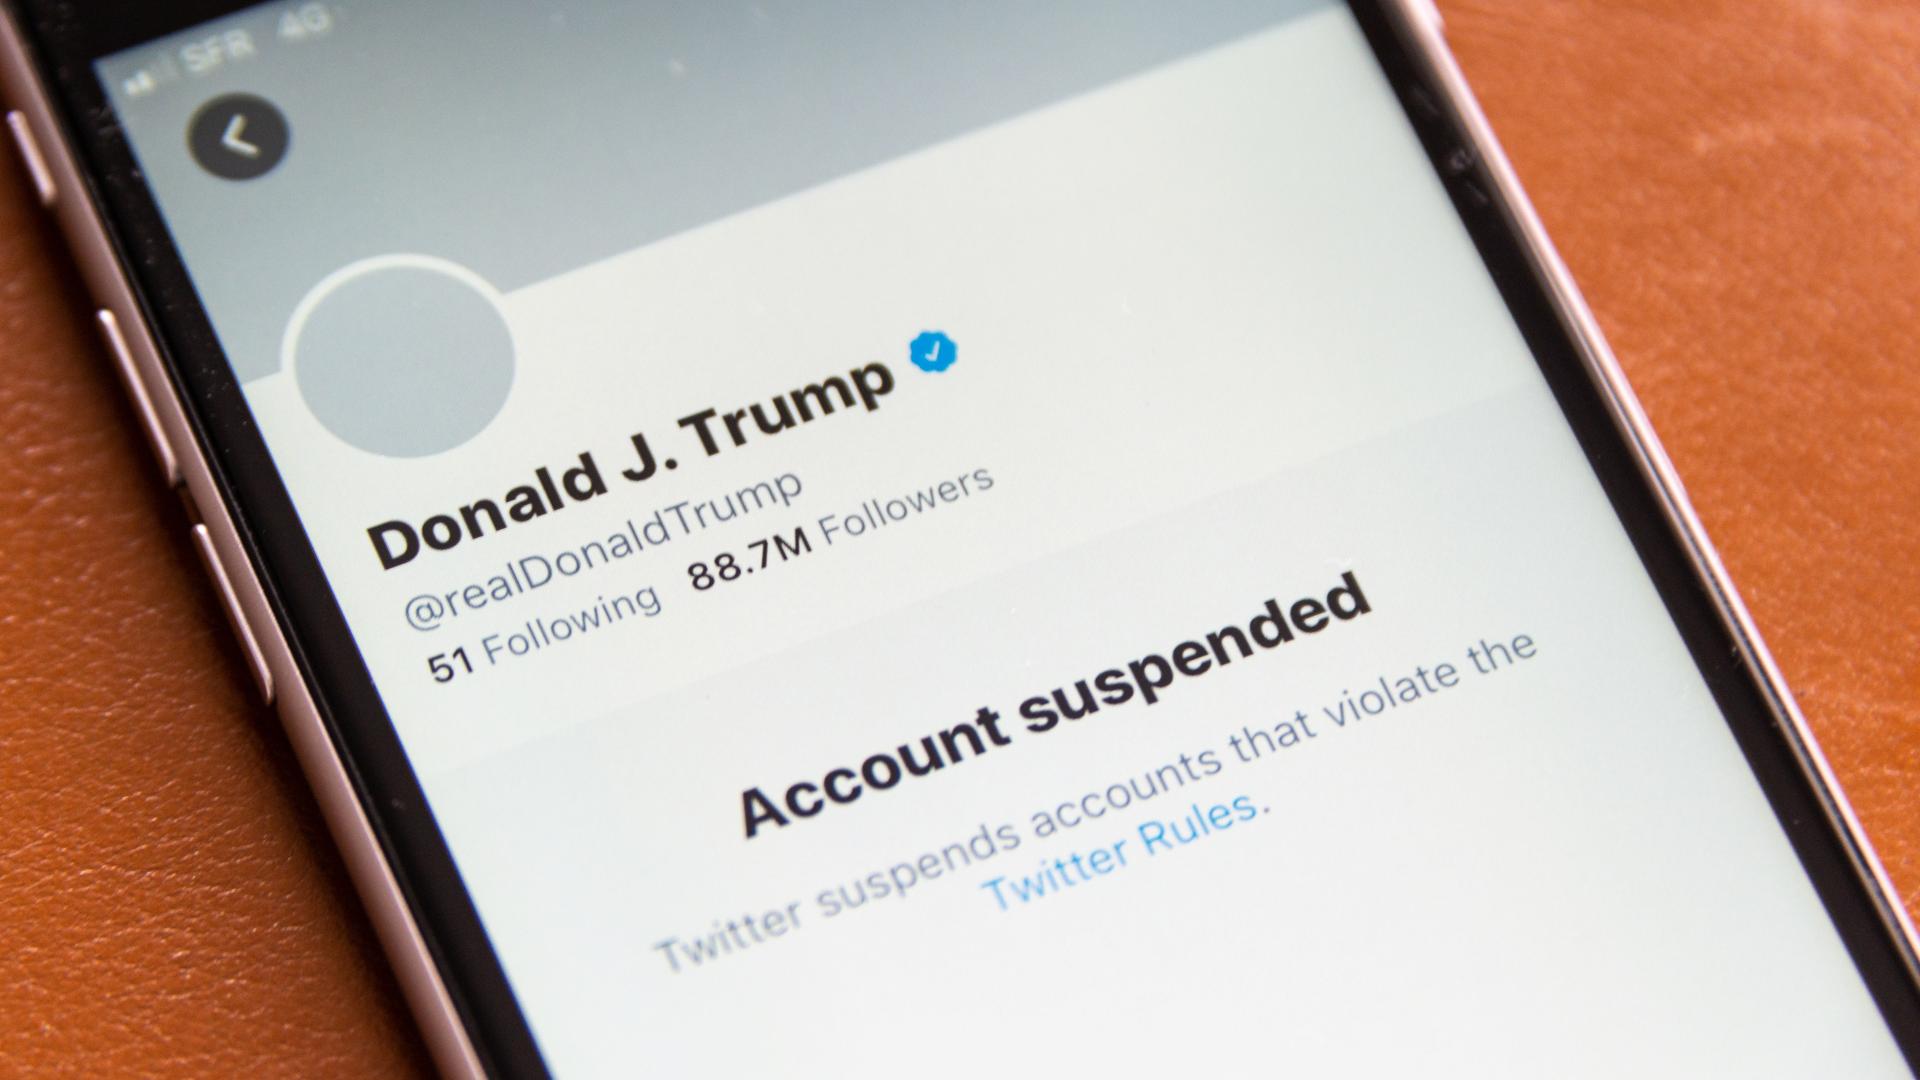 US President Donald Trump has been permanently suspended from Twitter